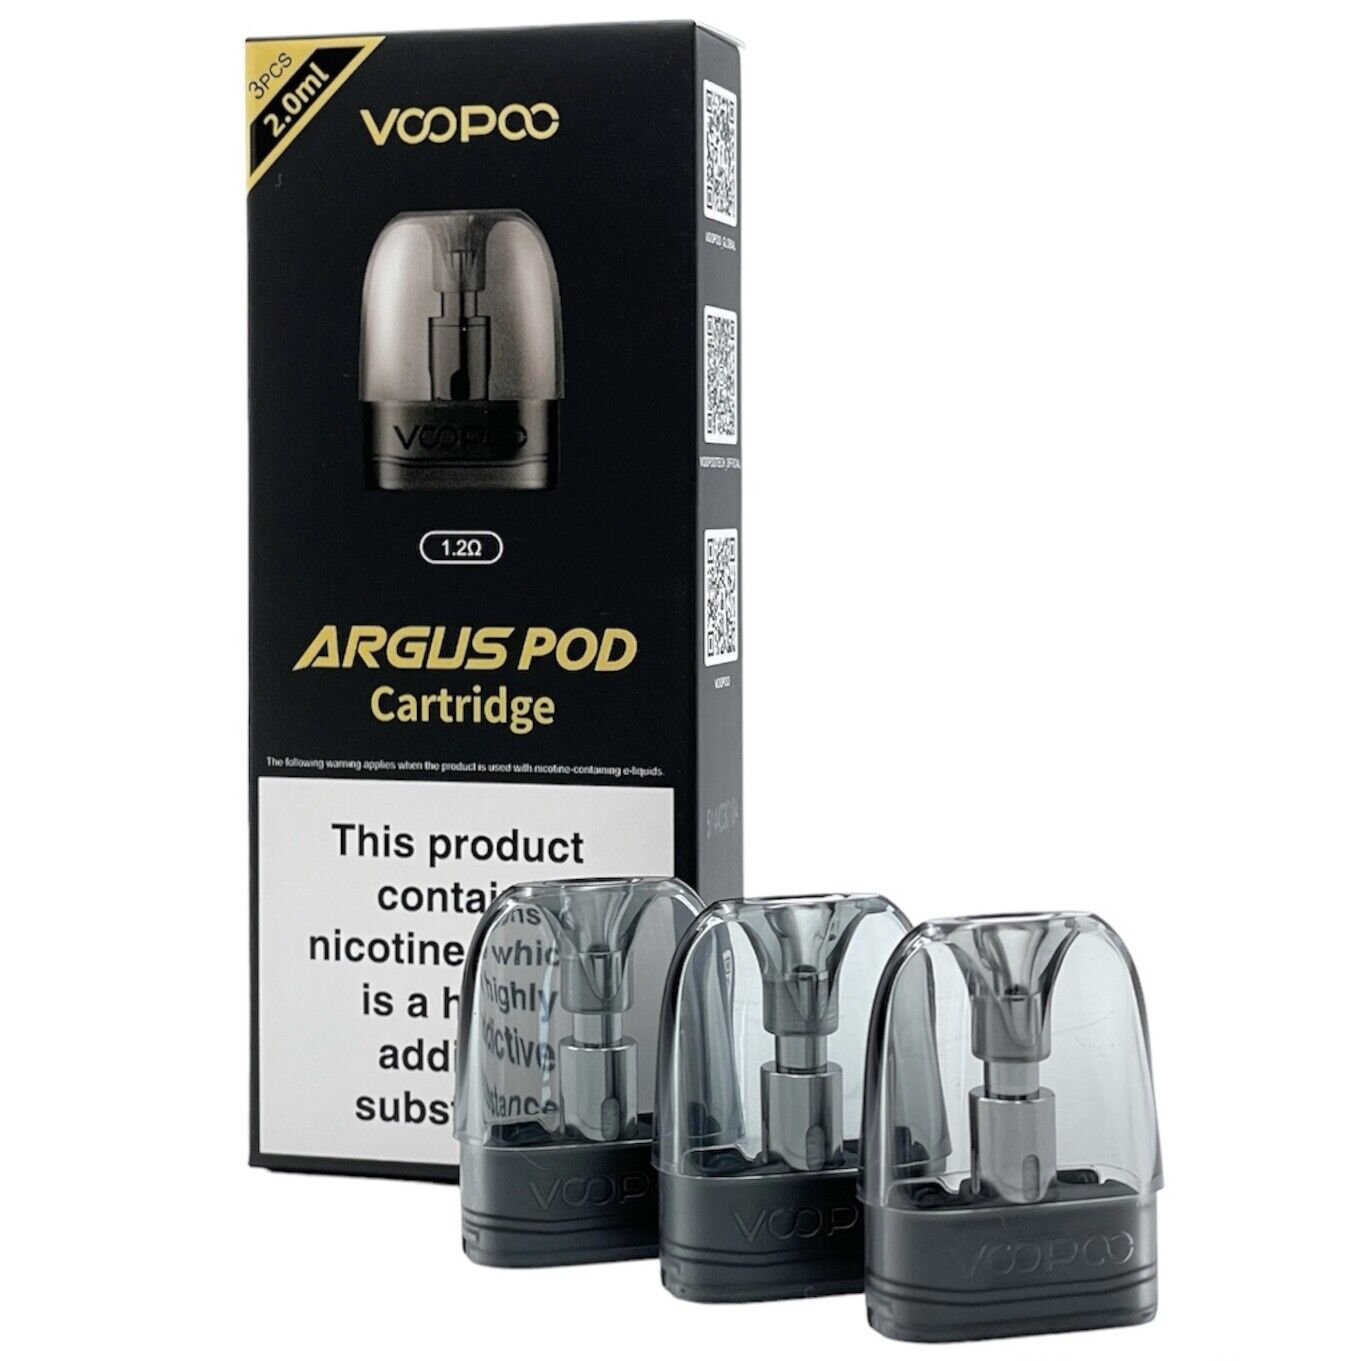 voopoo-argus-pod-cartridge-replacement-pods-pack-of-3-vapes-near-me-coils